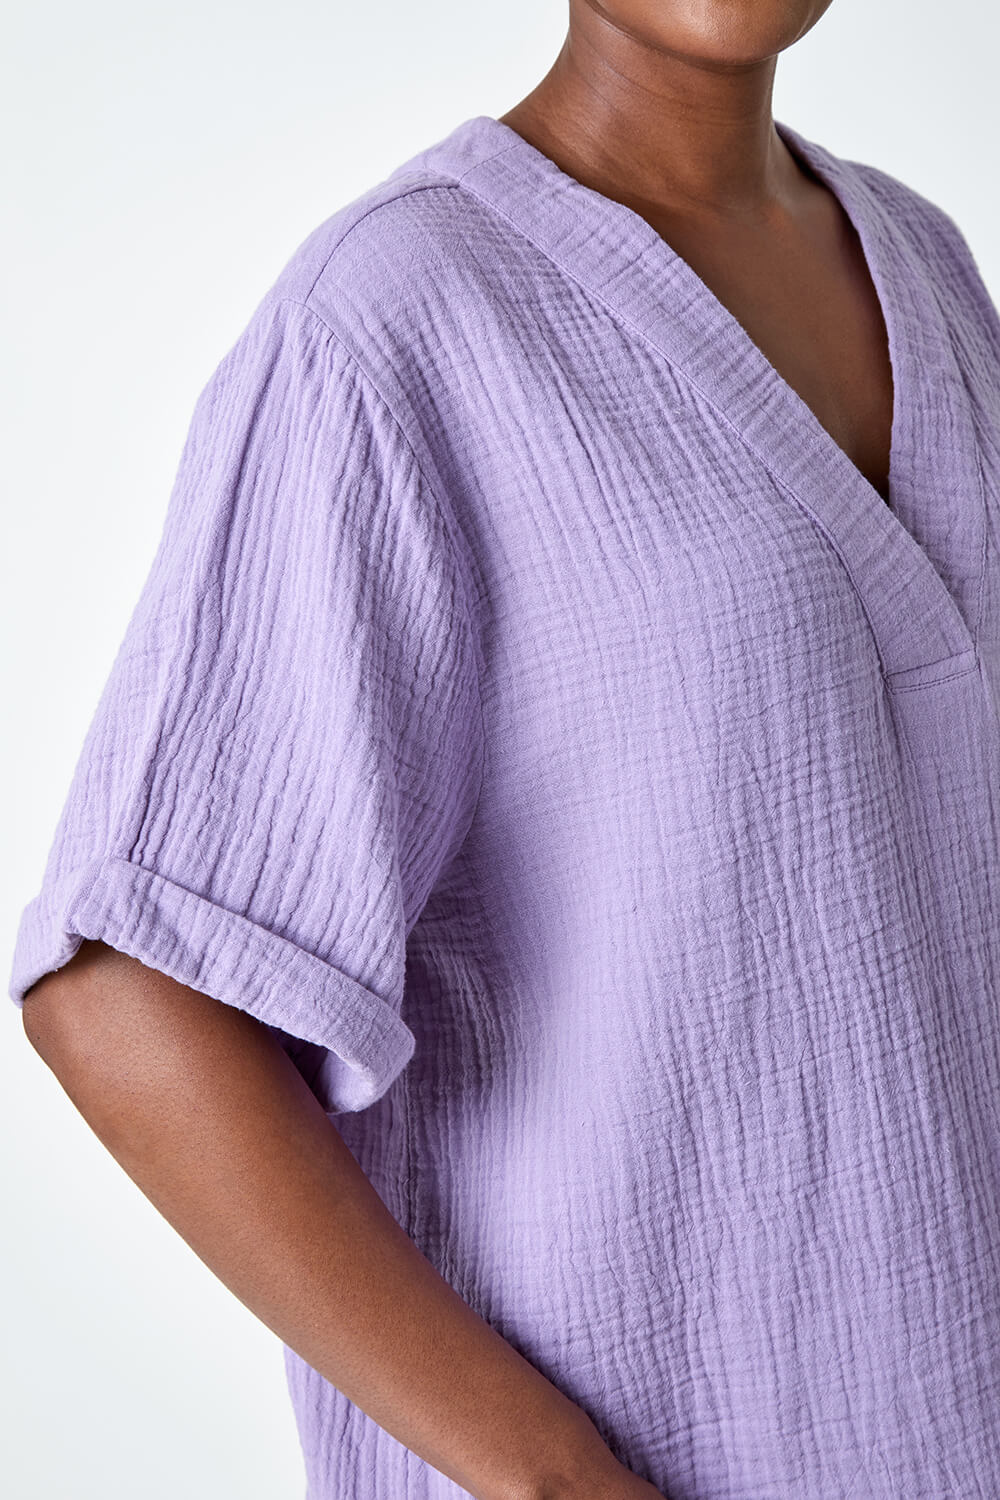 Lilac Textured Cotton Relaxed T-Shirt, Image 5 of 5